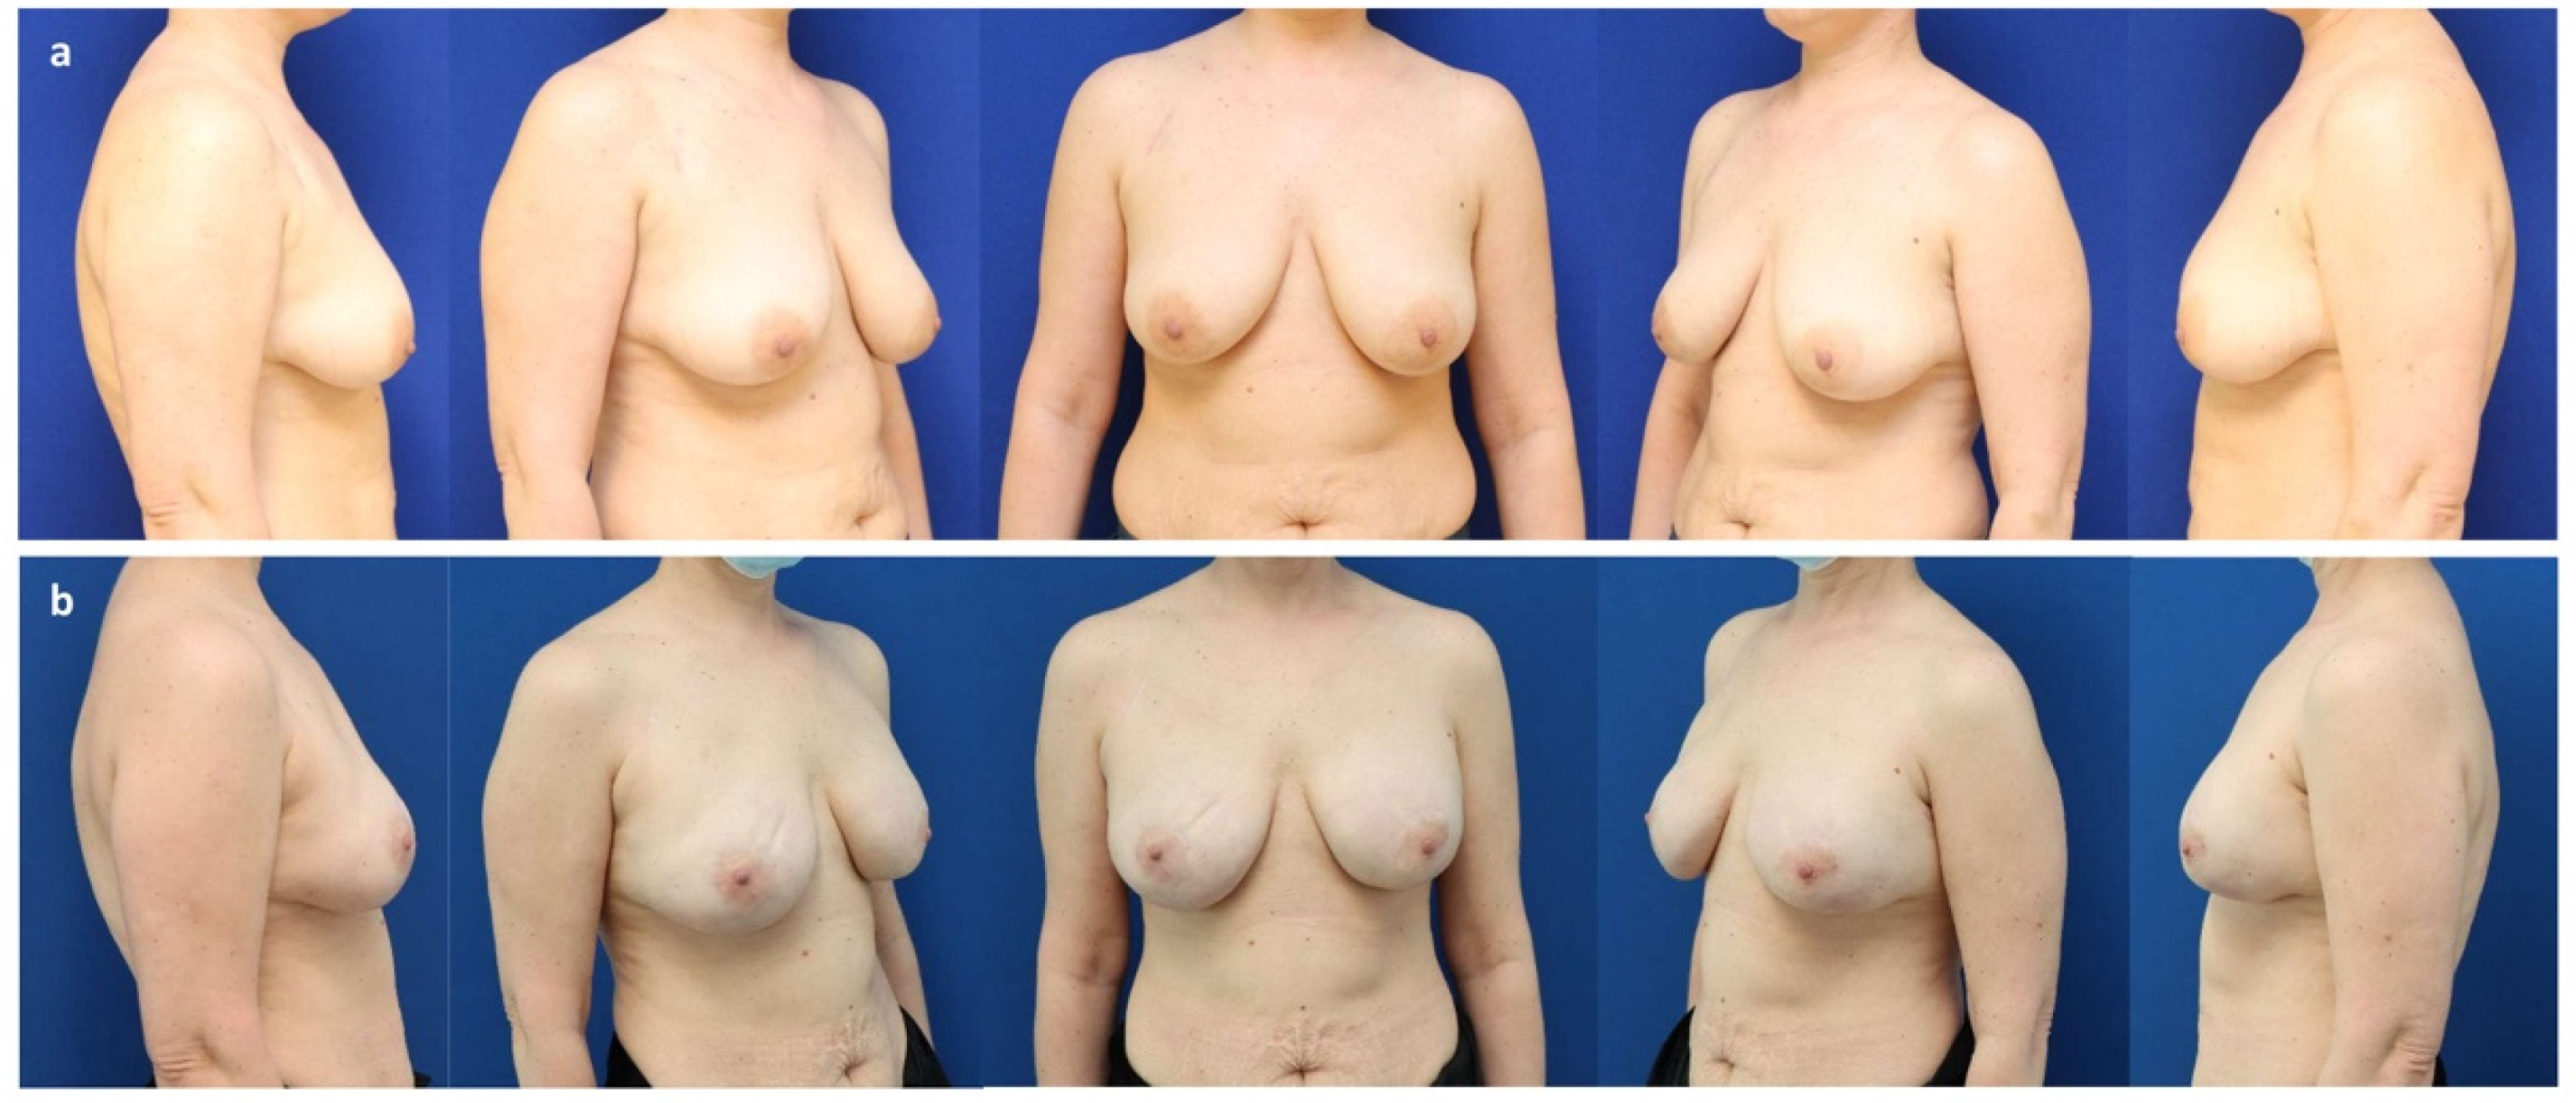 Can You Make Your Reconstructed Breasts Smaller During Stage 2? - PRMA